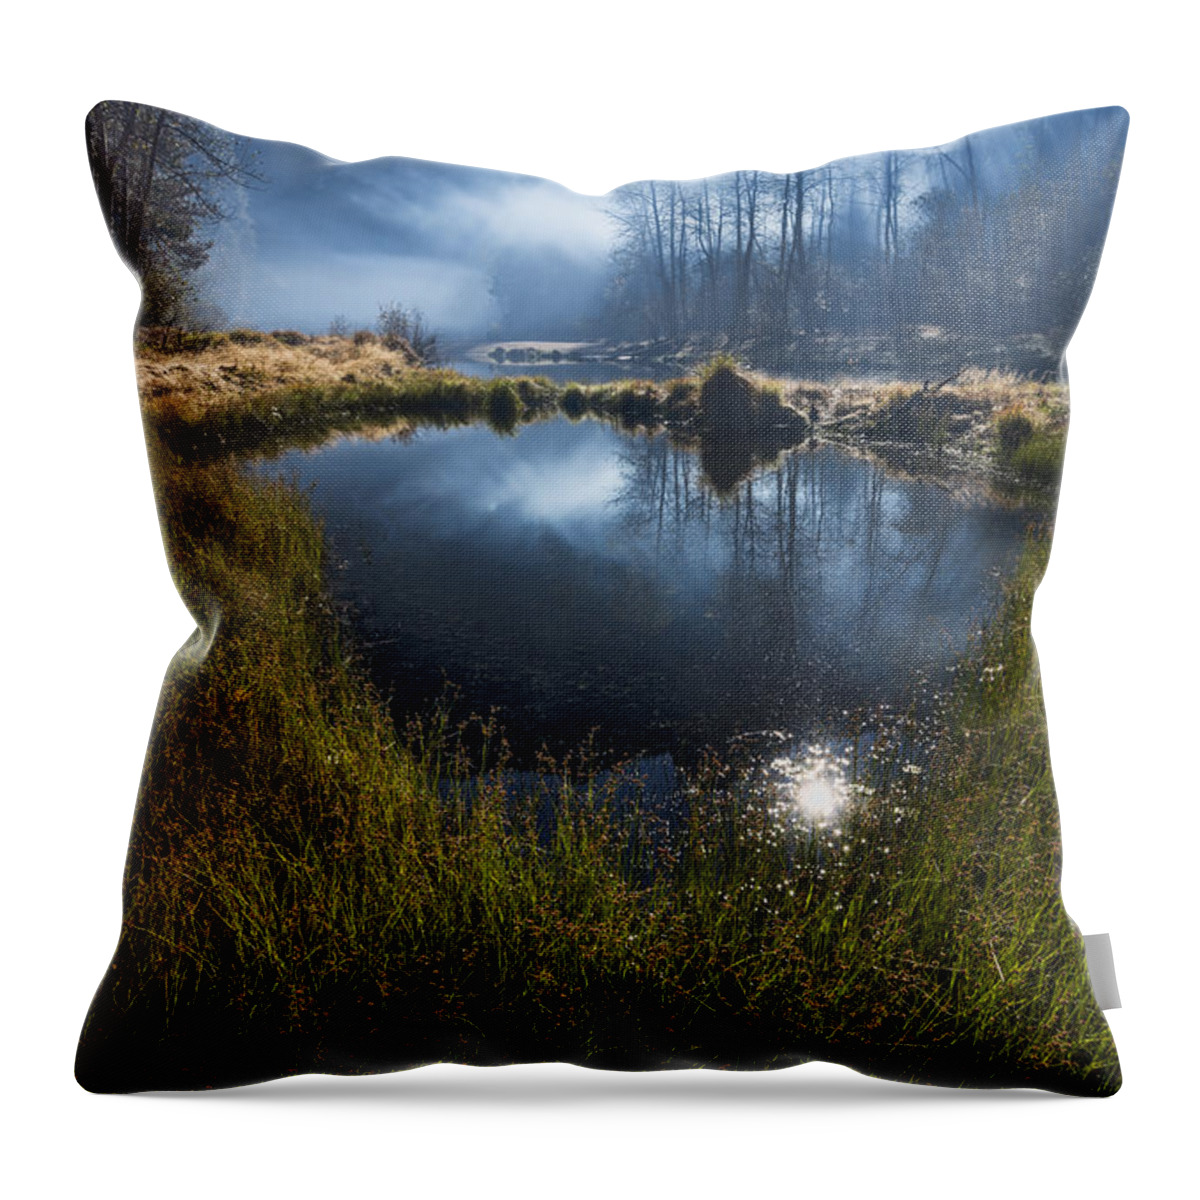 Yosemite Throw Pillow featuring the photograph Enchanted Pond by Dan McGeorge